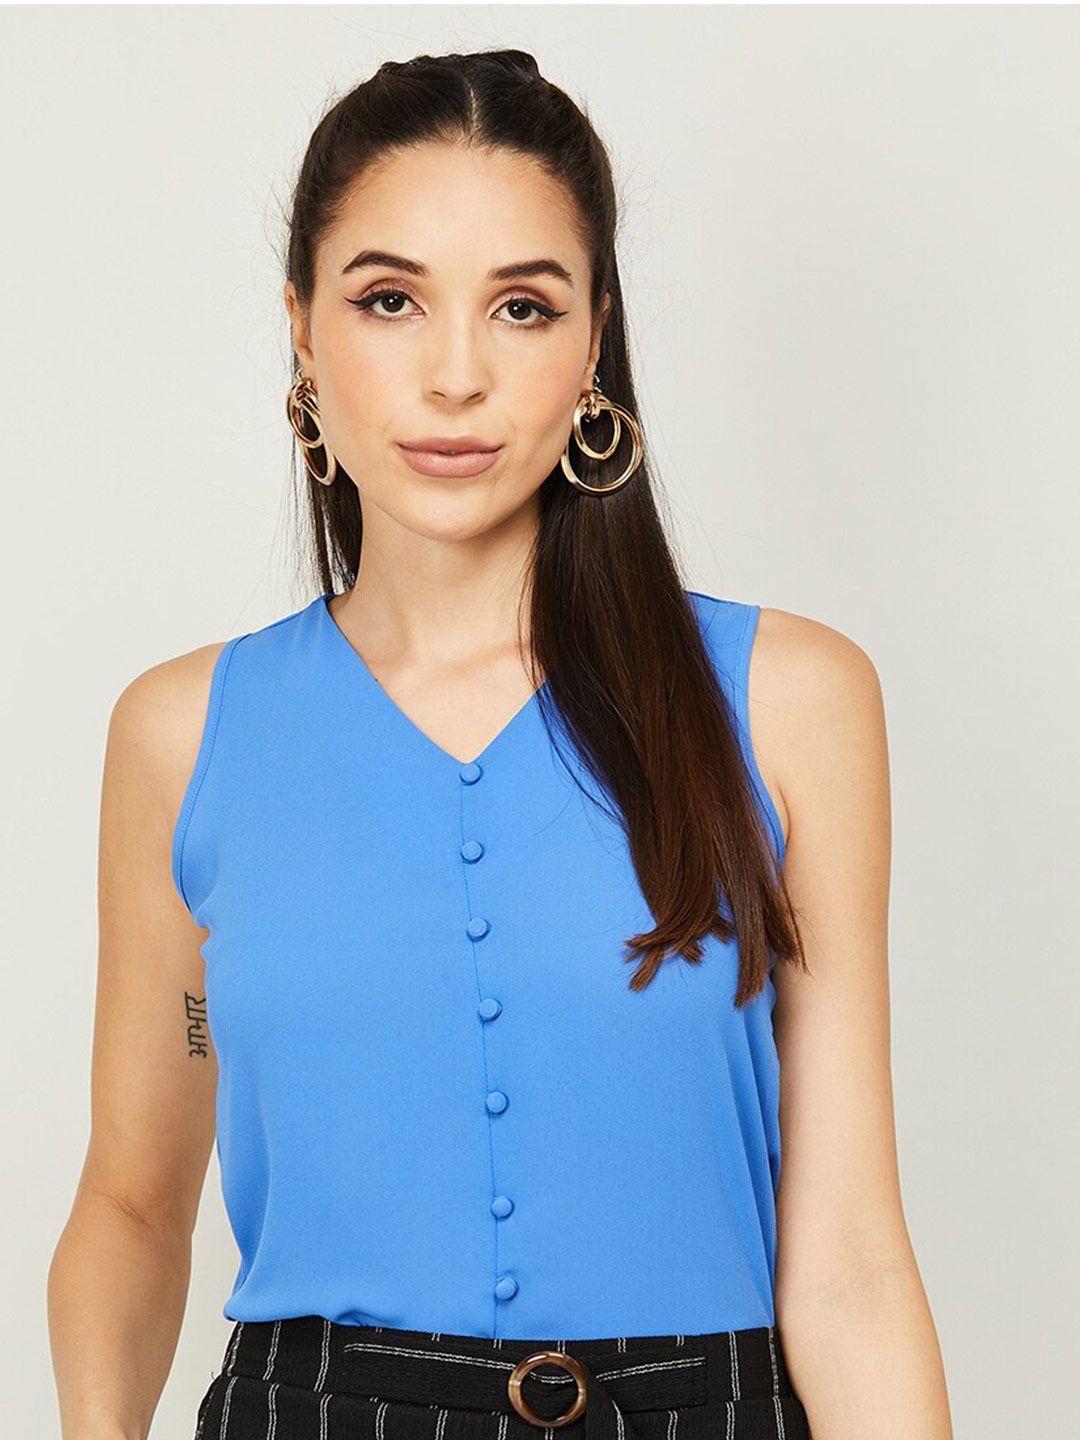 code by lifestyle v-neck sleeveless top